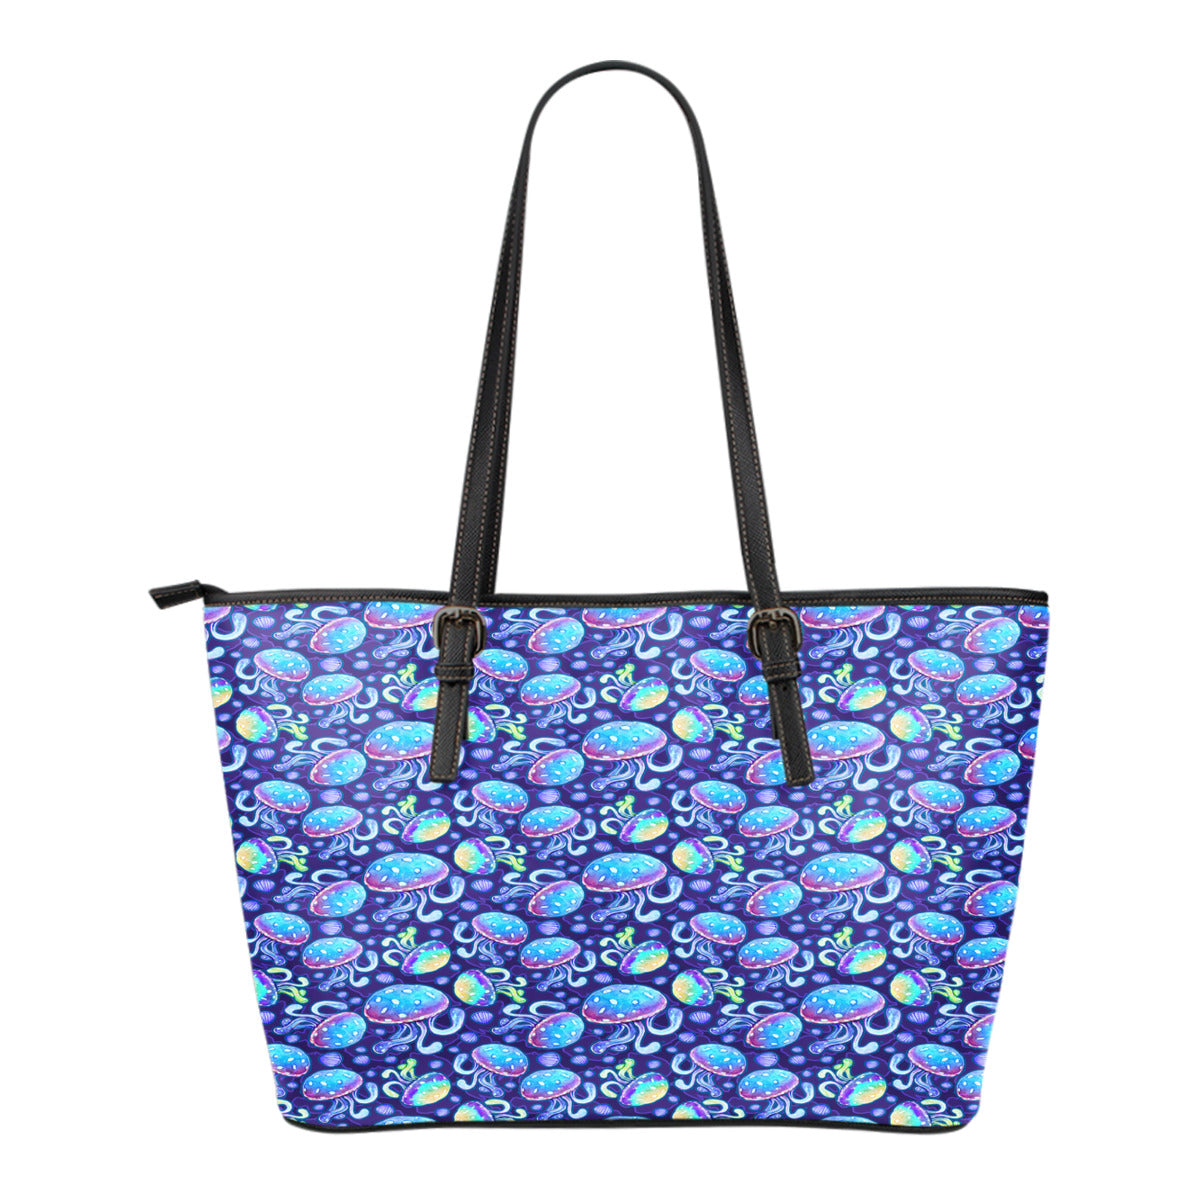 Mermaid Themed Design C11 Women Small Leather Tote Bag